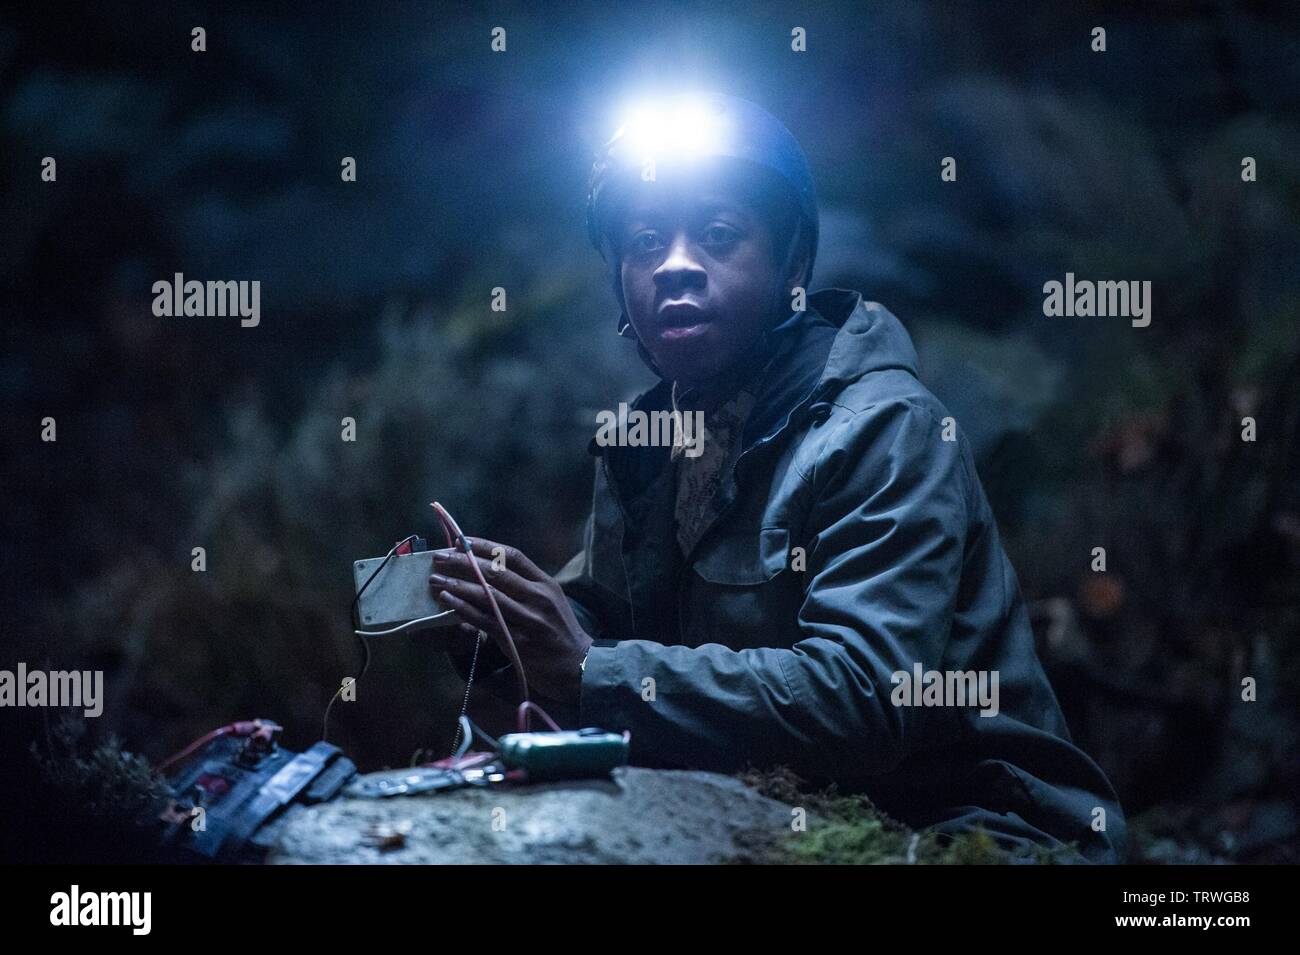 RJ CYLER in POWER RANGERS (2017). Copyright: Editorial use only. No merchandising or book covers. This is a publicly distributed handout. Access rights only, no license of copyright provided. Only to be reproduced in conjunction with promotion of this film. Credit: LIONSGATE/SABAN BRANDS/SABAN ENT/WALT DISNEY STUDIOS / Album Stock Photo